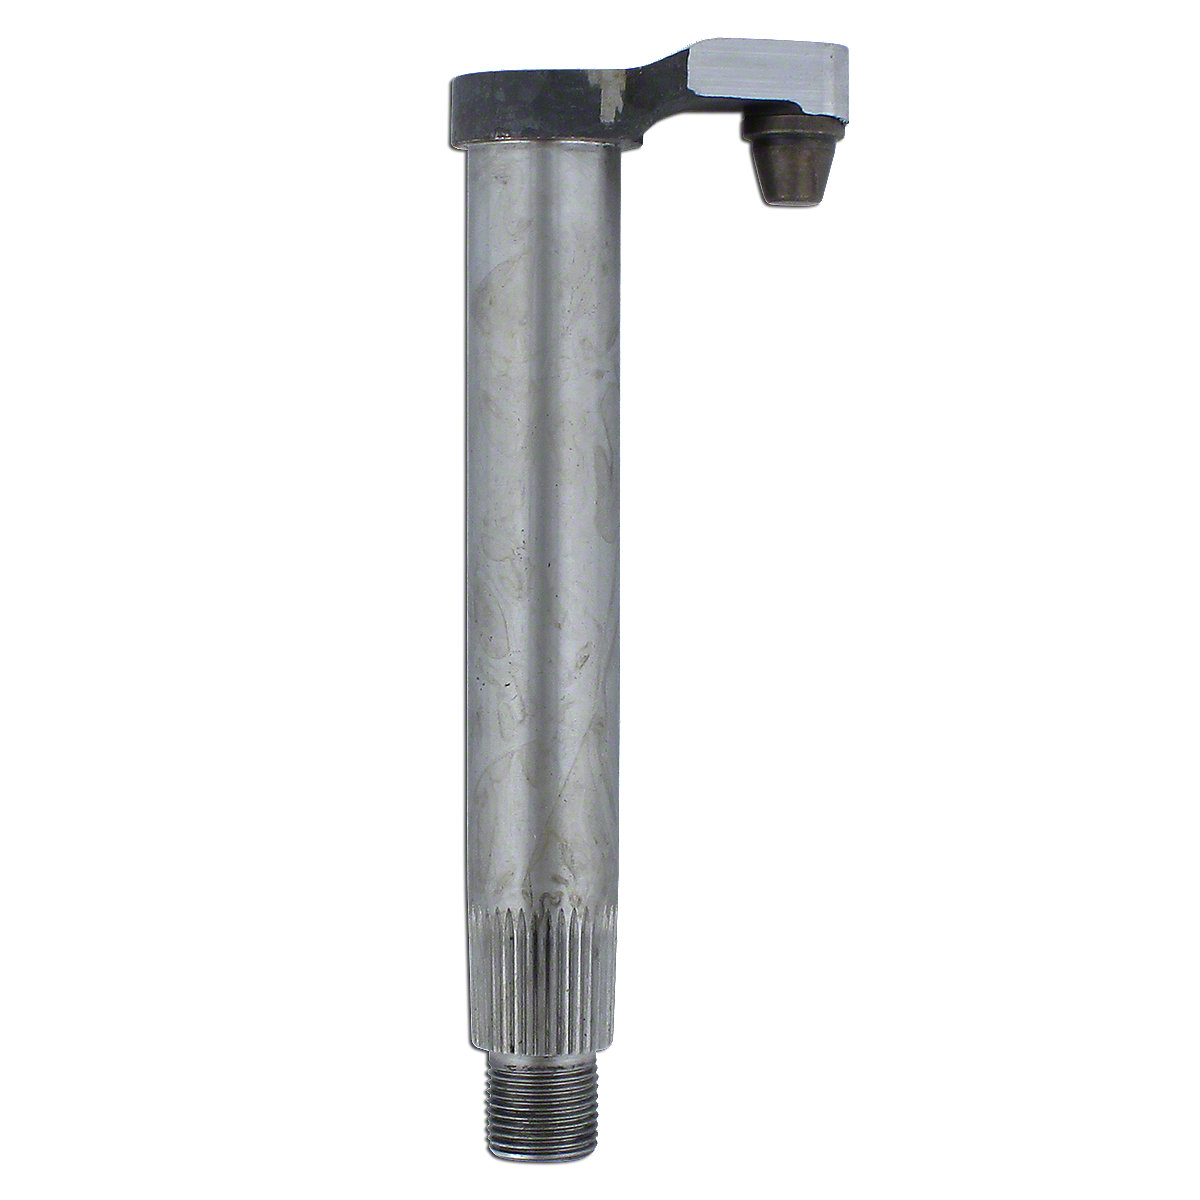 MH0015   Stering Shaft with Pin---Replaces 1503398M11